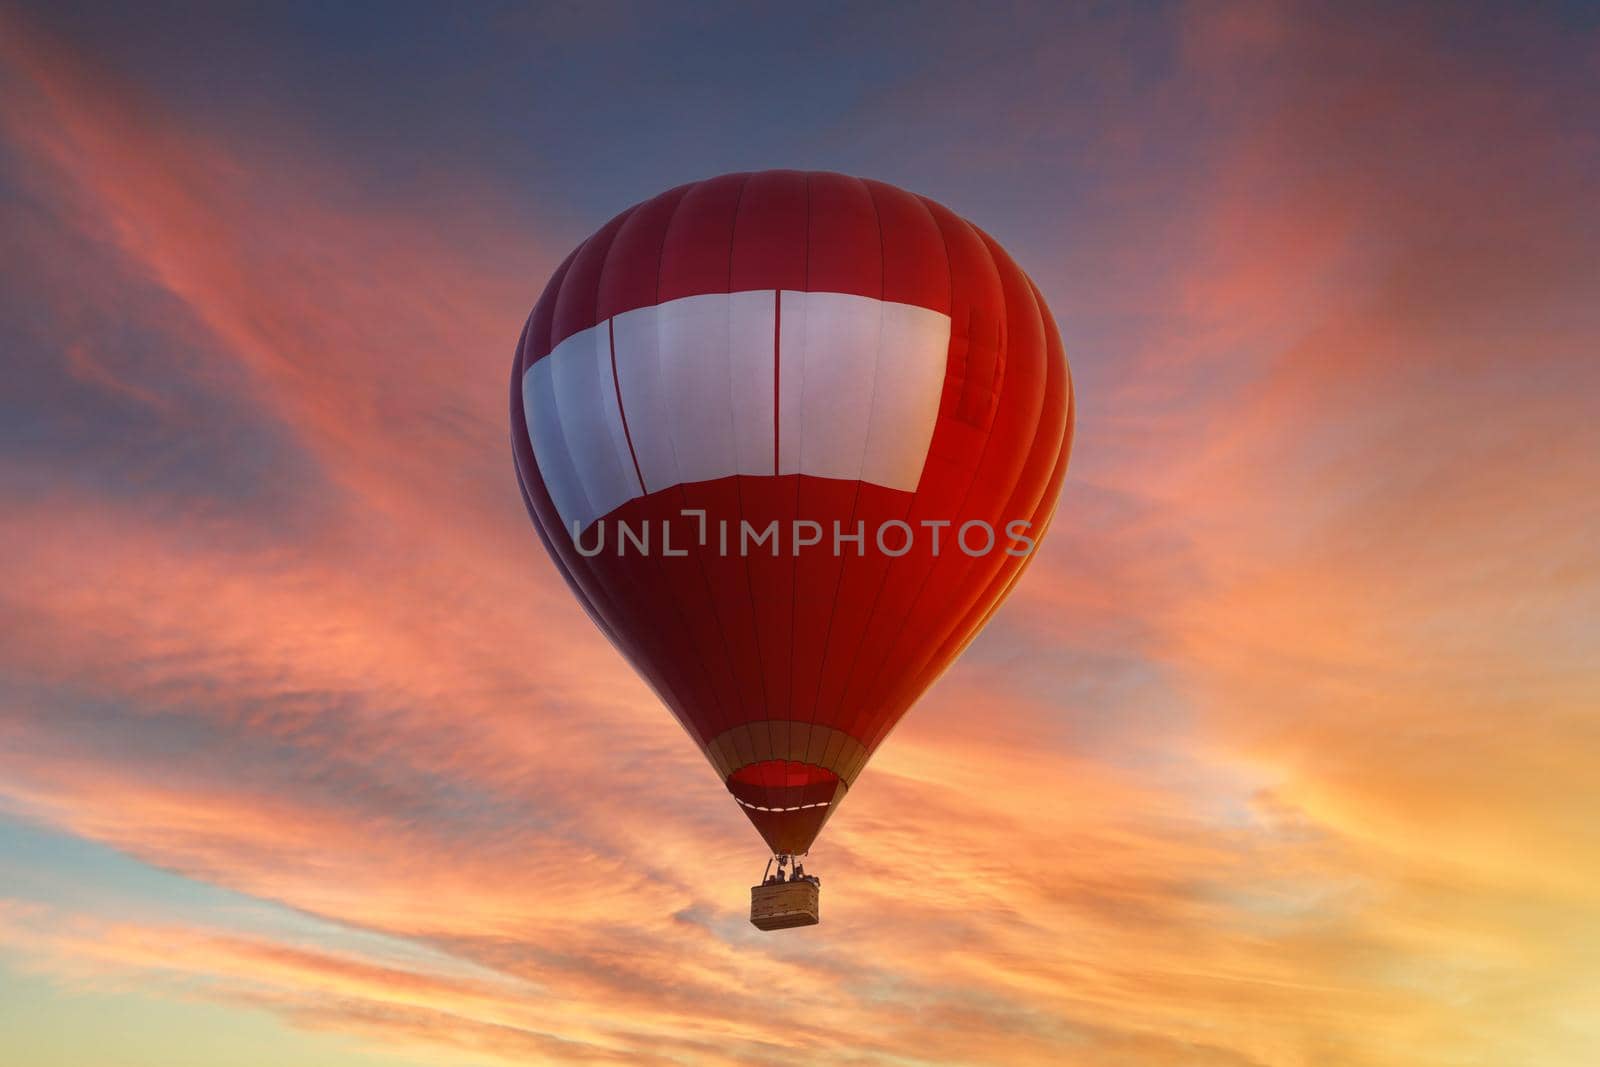 Red hot air balloon flying in the sky at sunset or sunrise by DariaKulkova